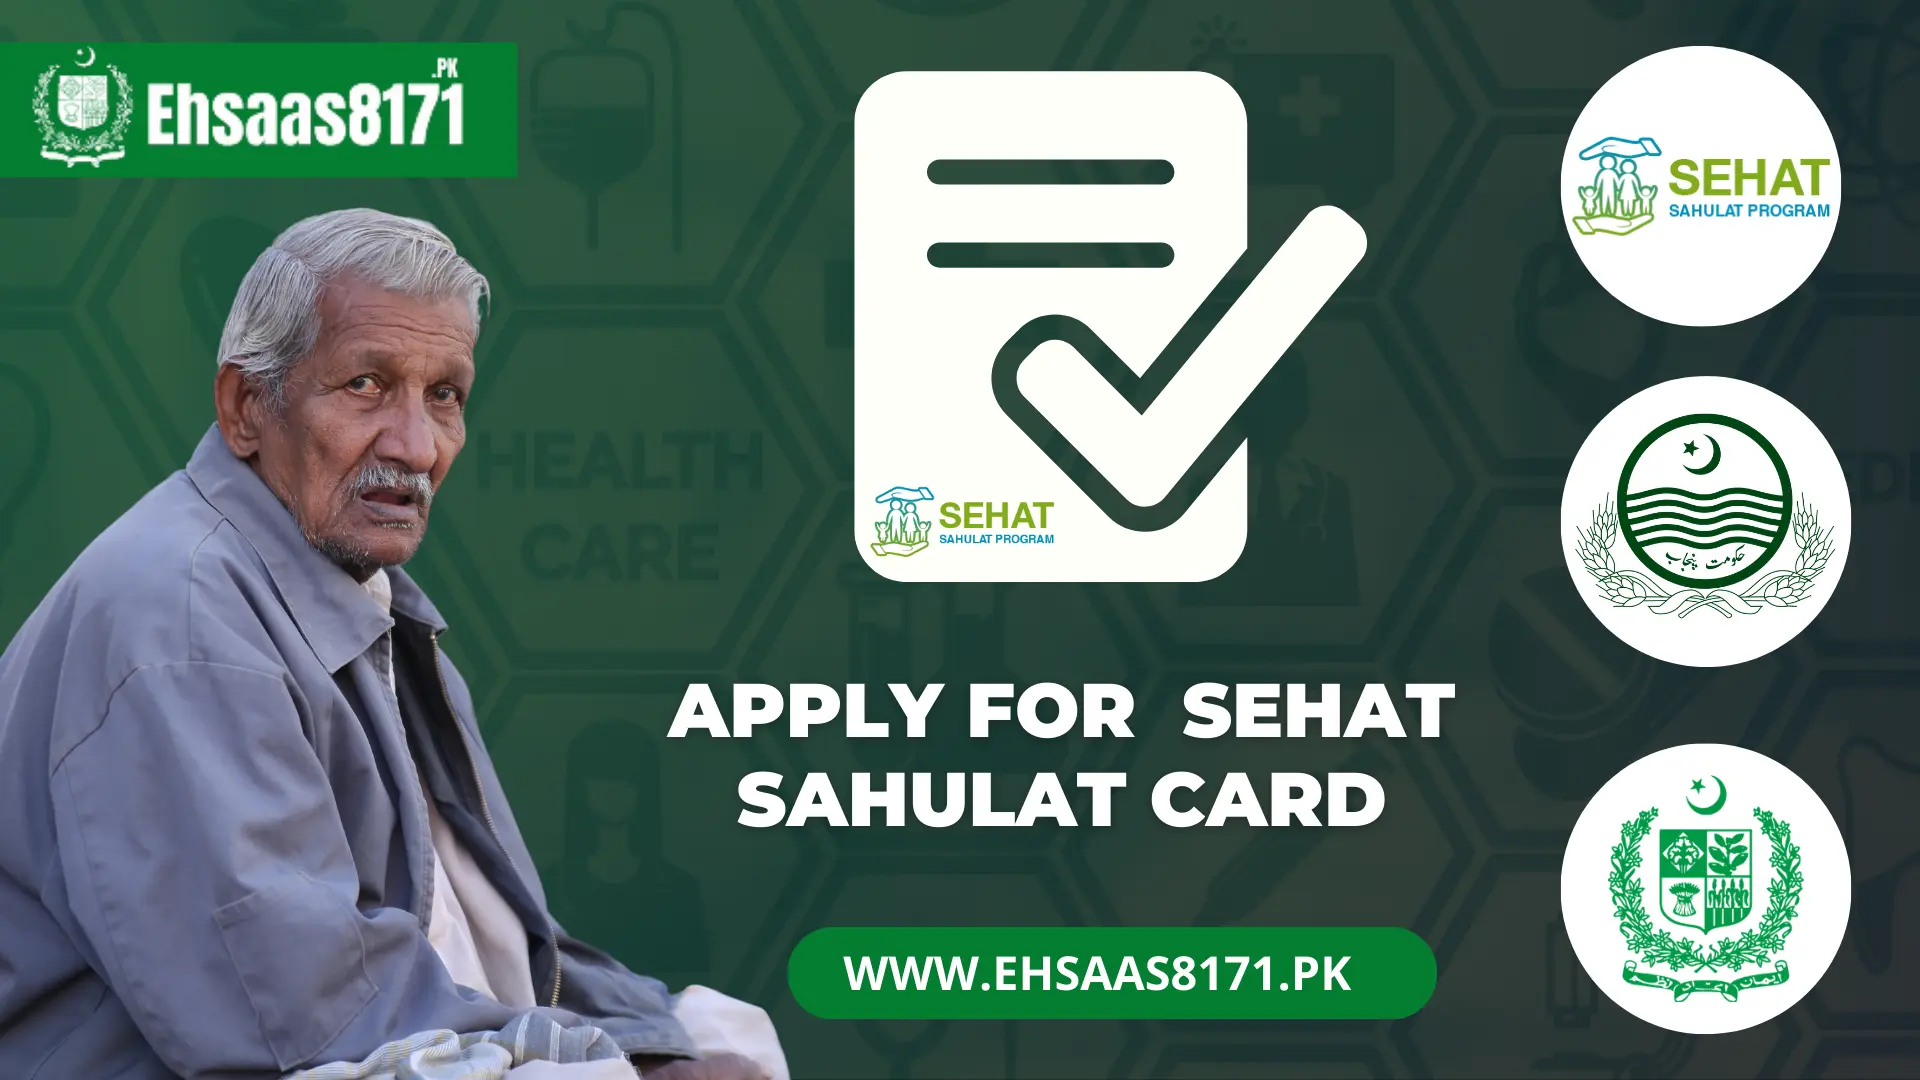 Procedure to apply for sehat sahulat card